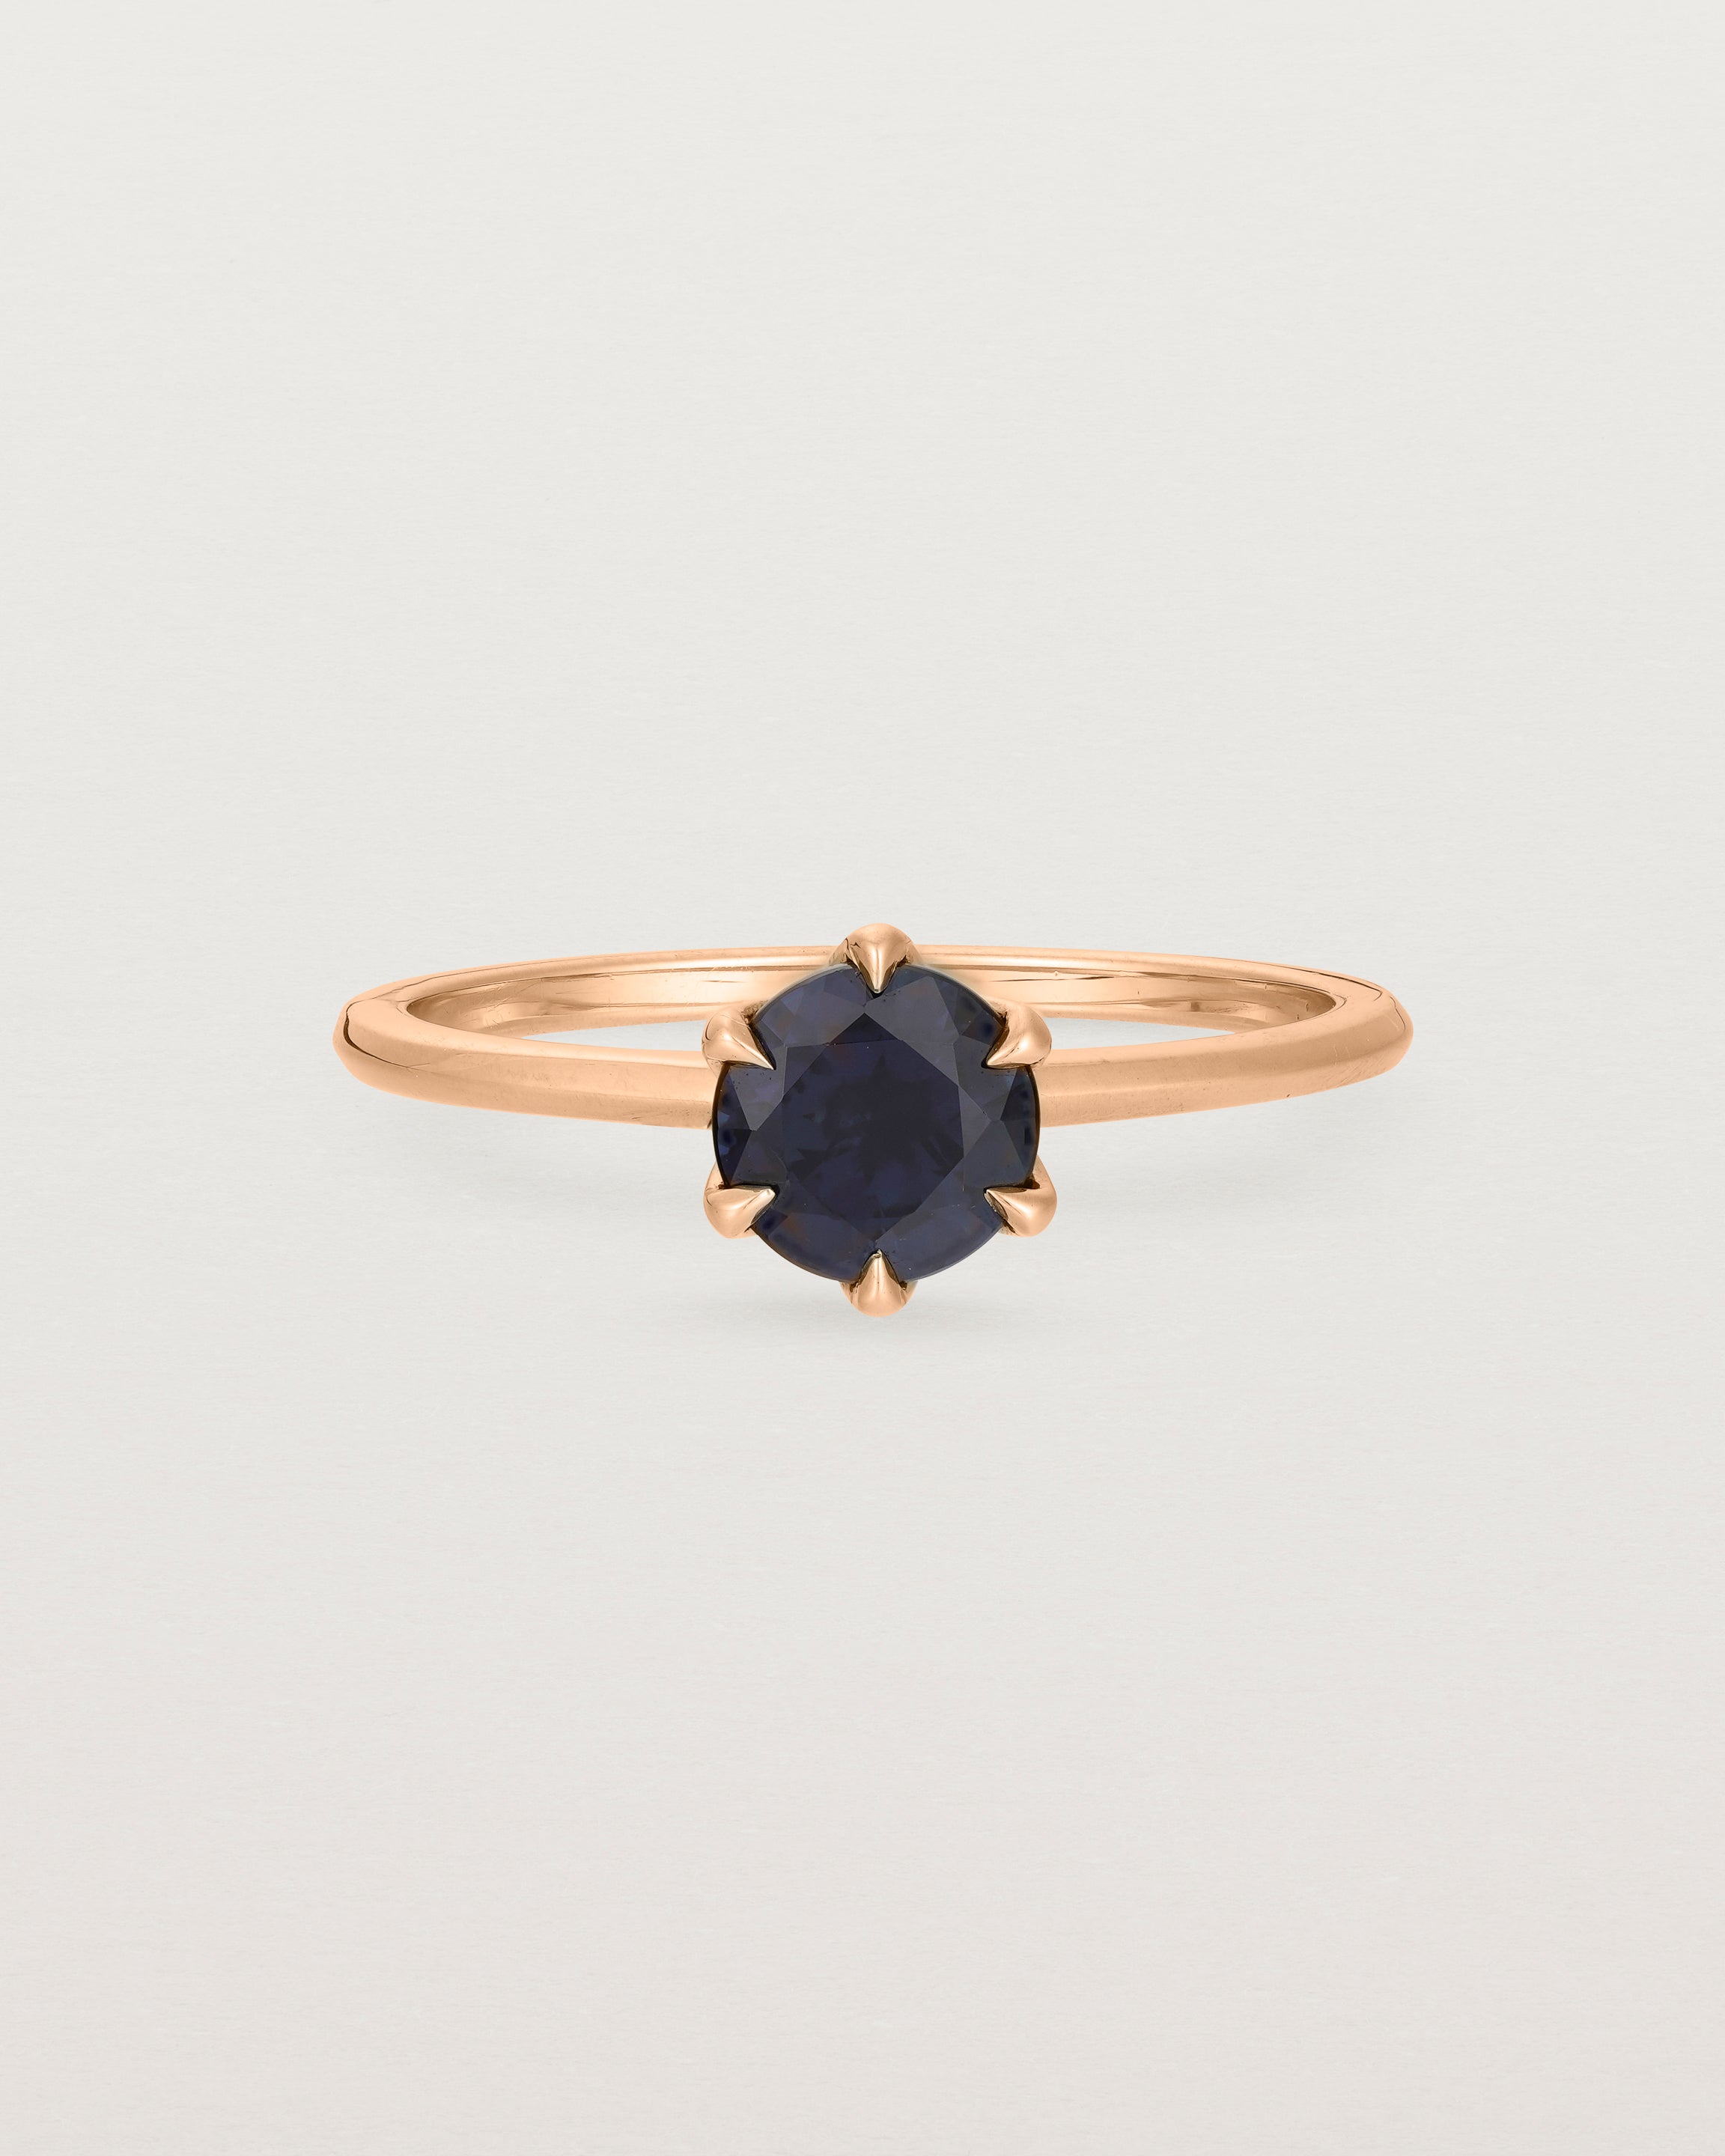 Front view of the Mandala Solitaire Ring | Australian Sapphire & Diamonds | Rose Gold.